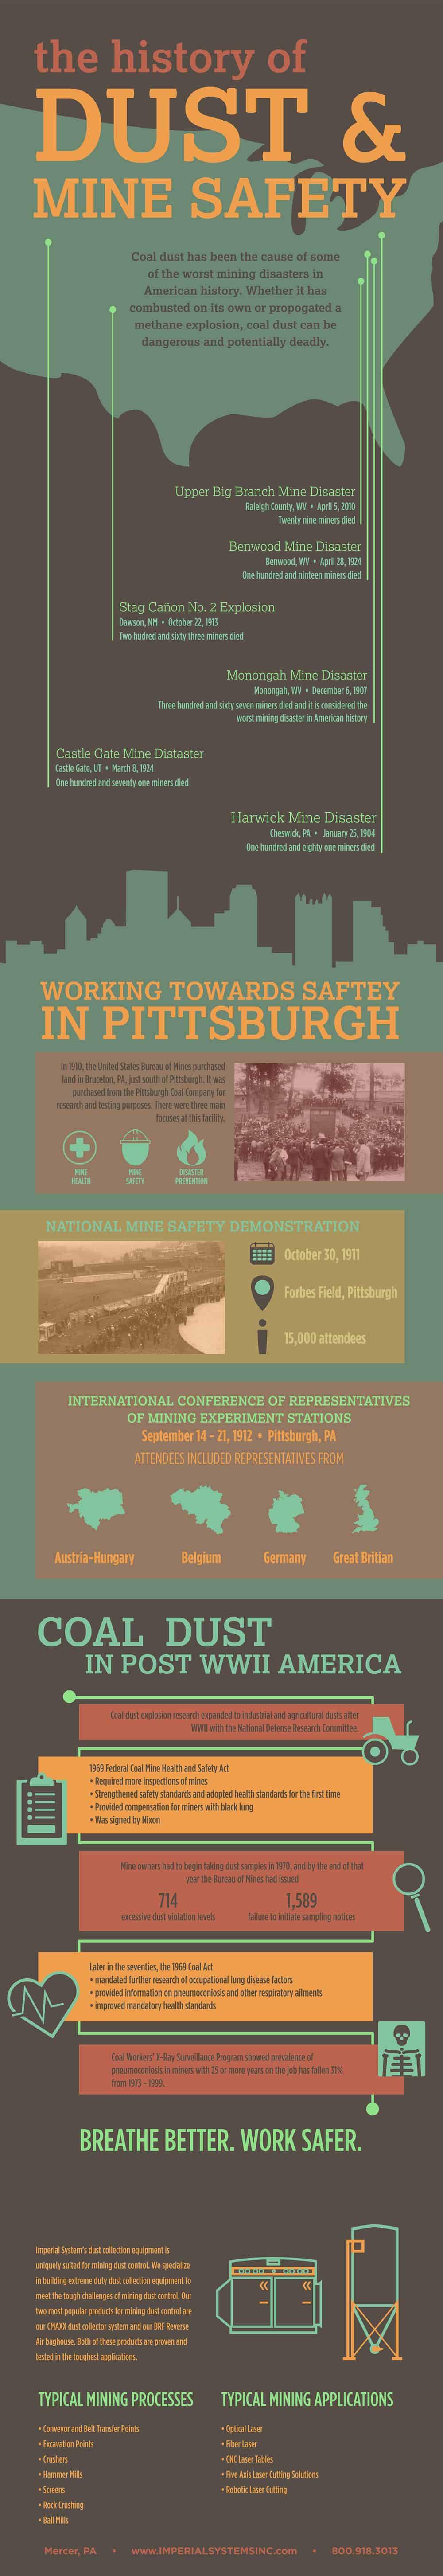 Infographic on The History of Dust & Mine Safety includes mine disaster events